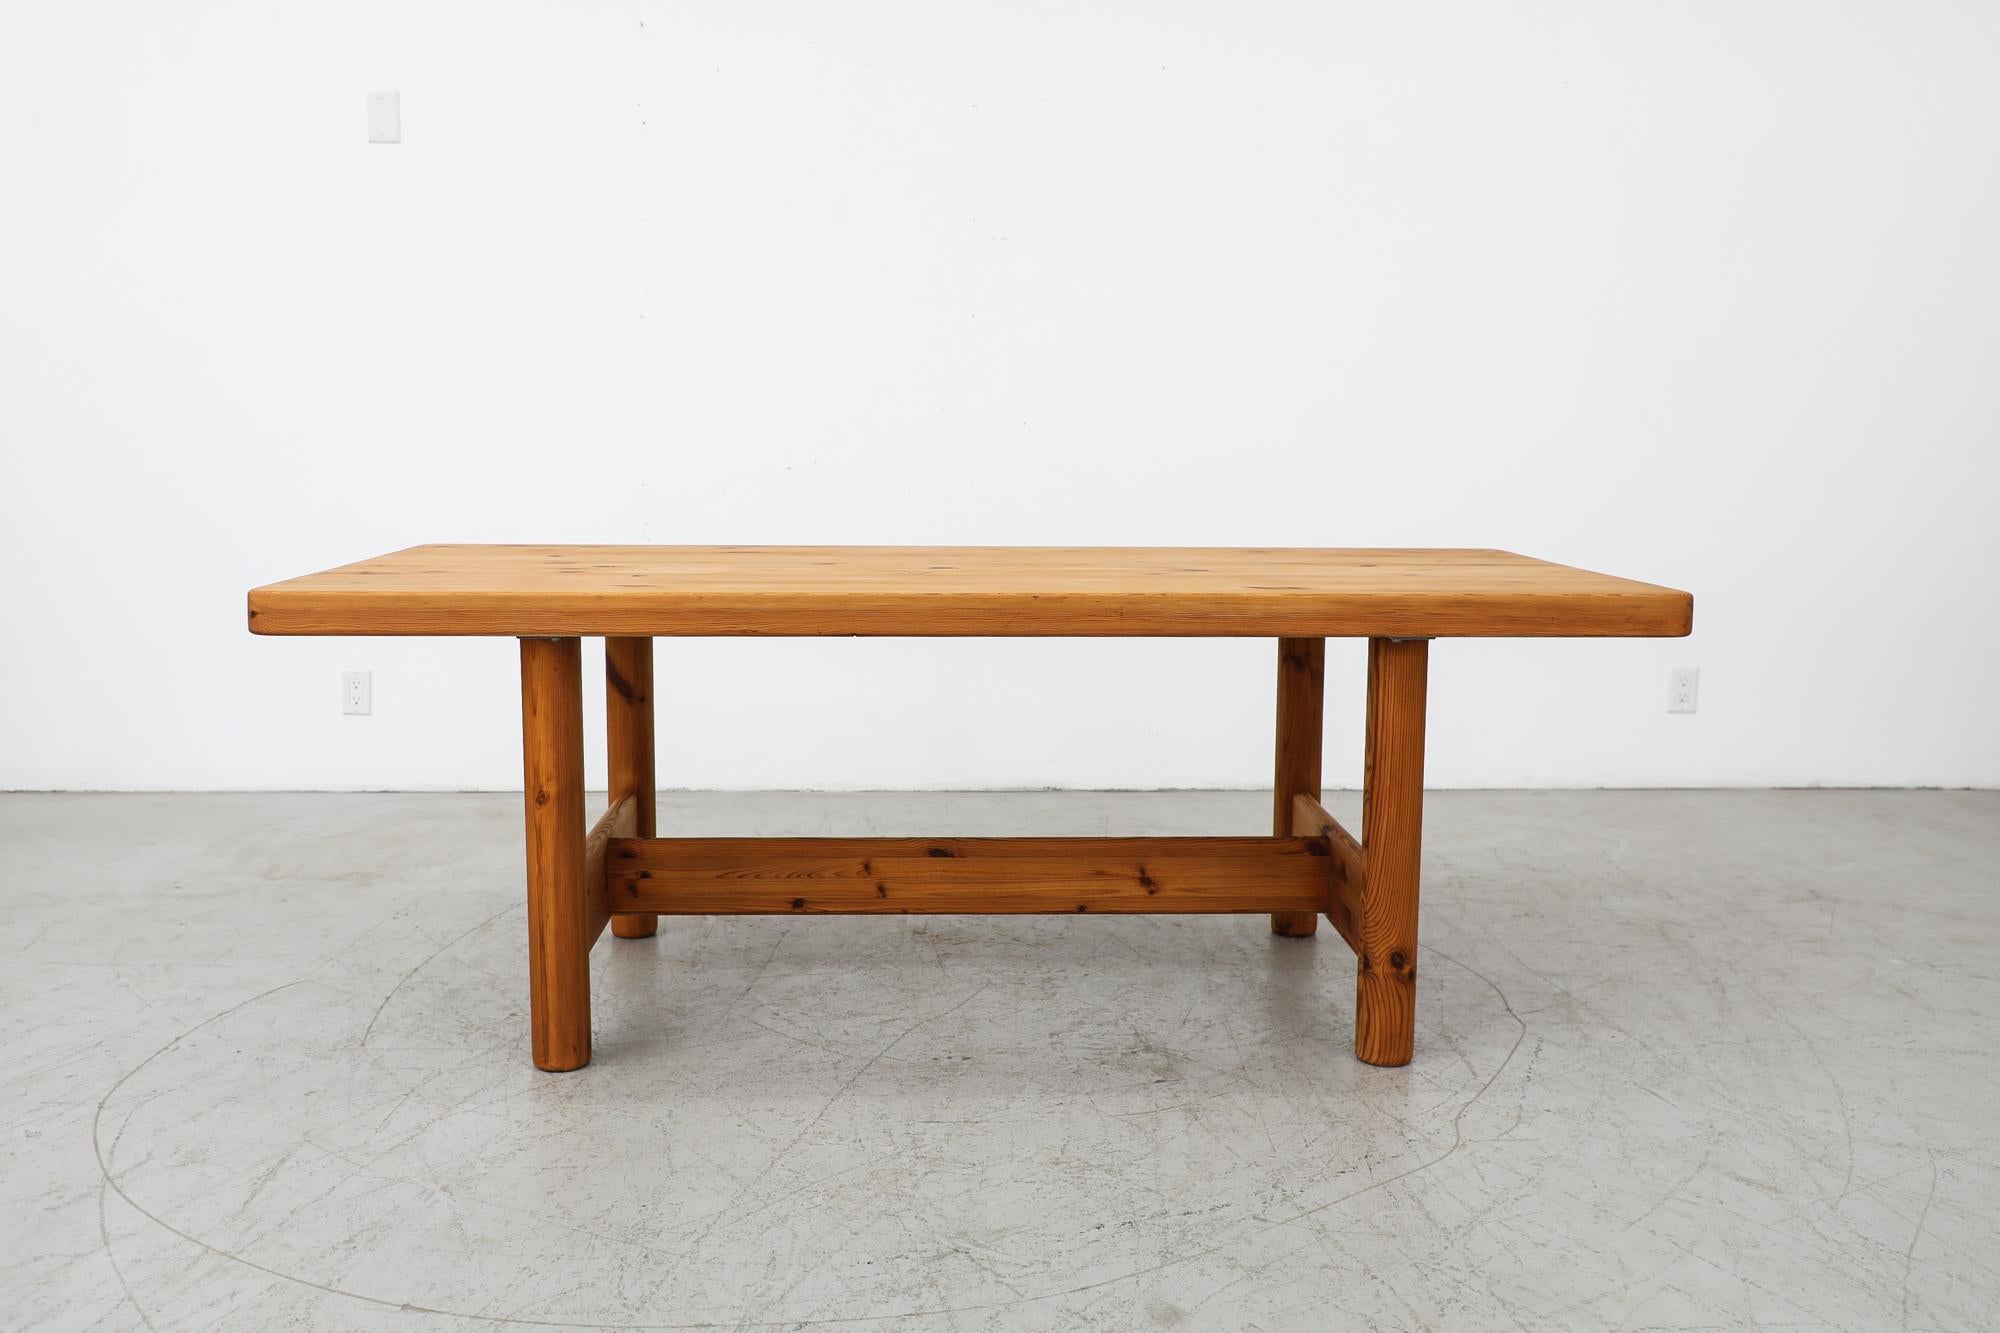 Extra large hand waxed solid pine dining table designed by Danish Mid-Century master Rainer Daumiller for Hirtshals Savvaerk. In original condition with a few light signs of wear, consistent with its age and use.